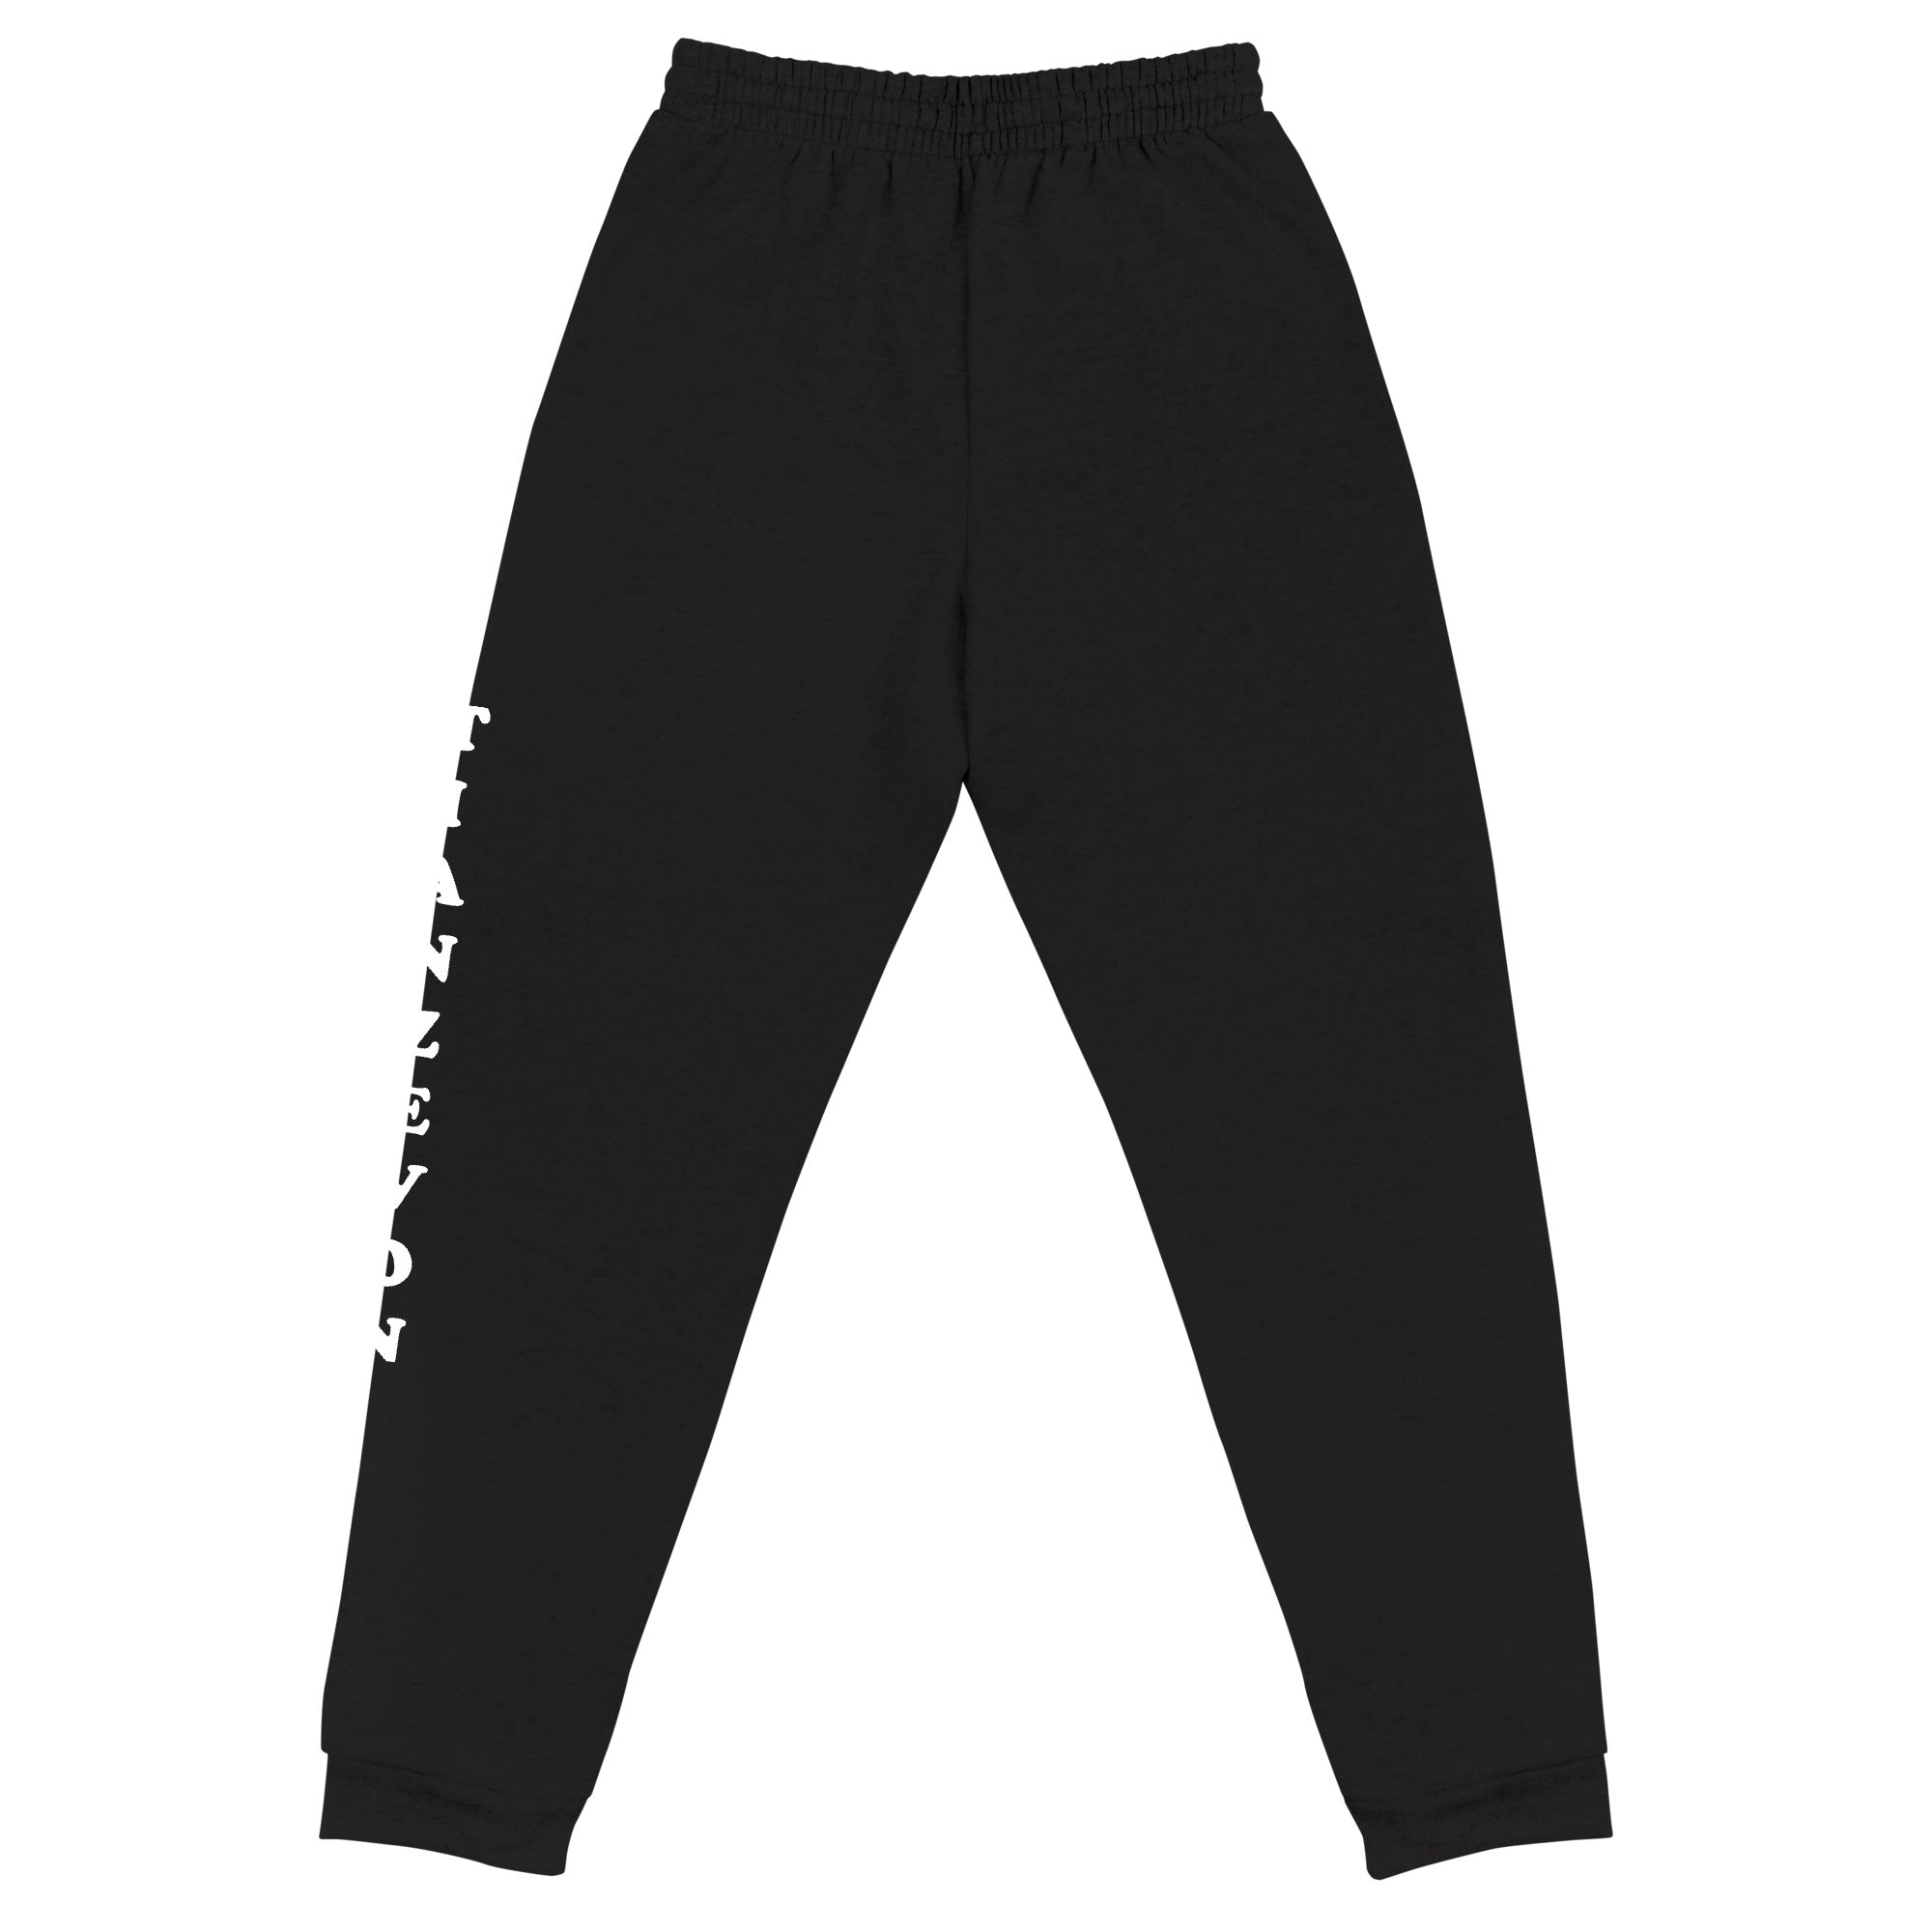 Unisex Fitted Joggers